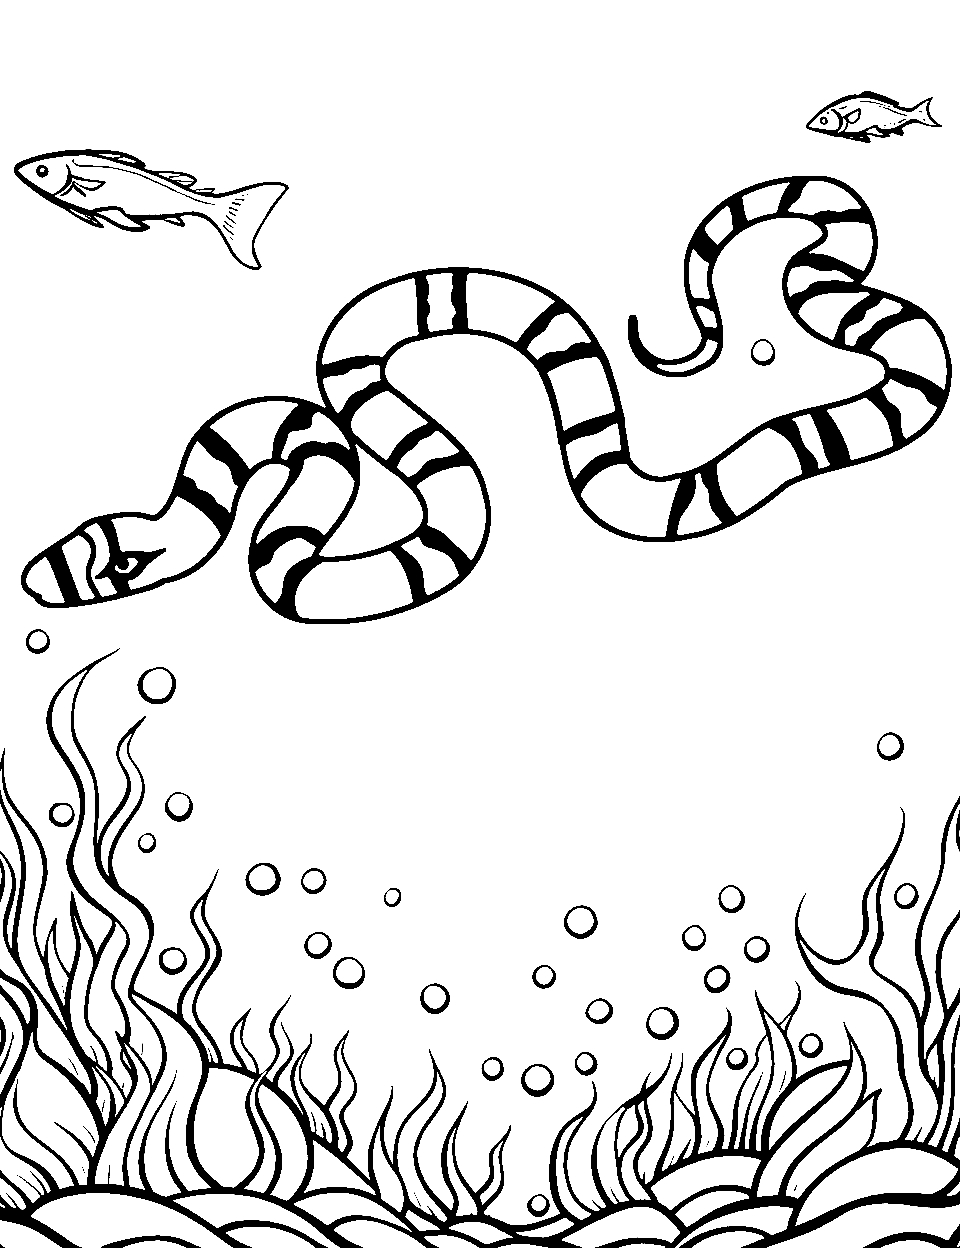 Mystical Sea Snake Coloring Page - A sea snake swimming among underwater corals.